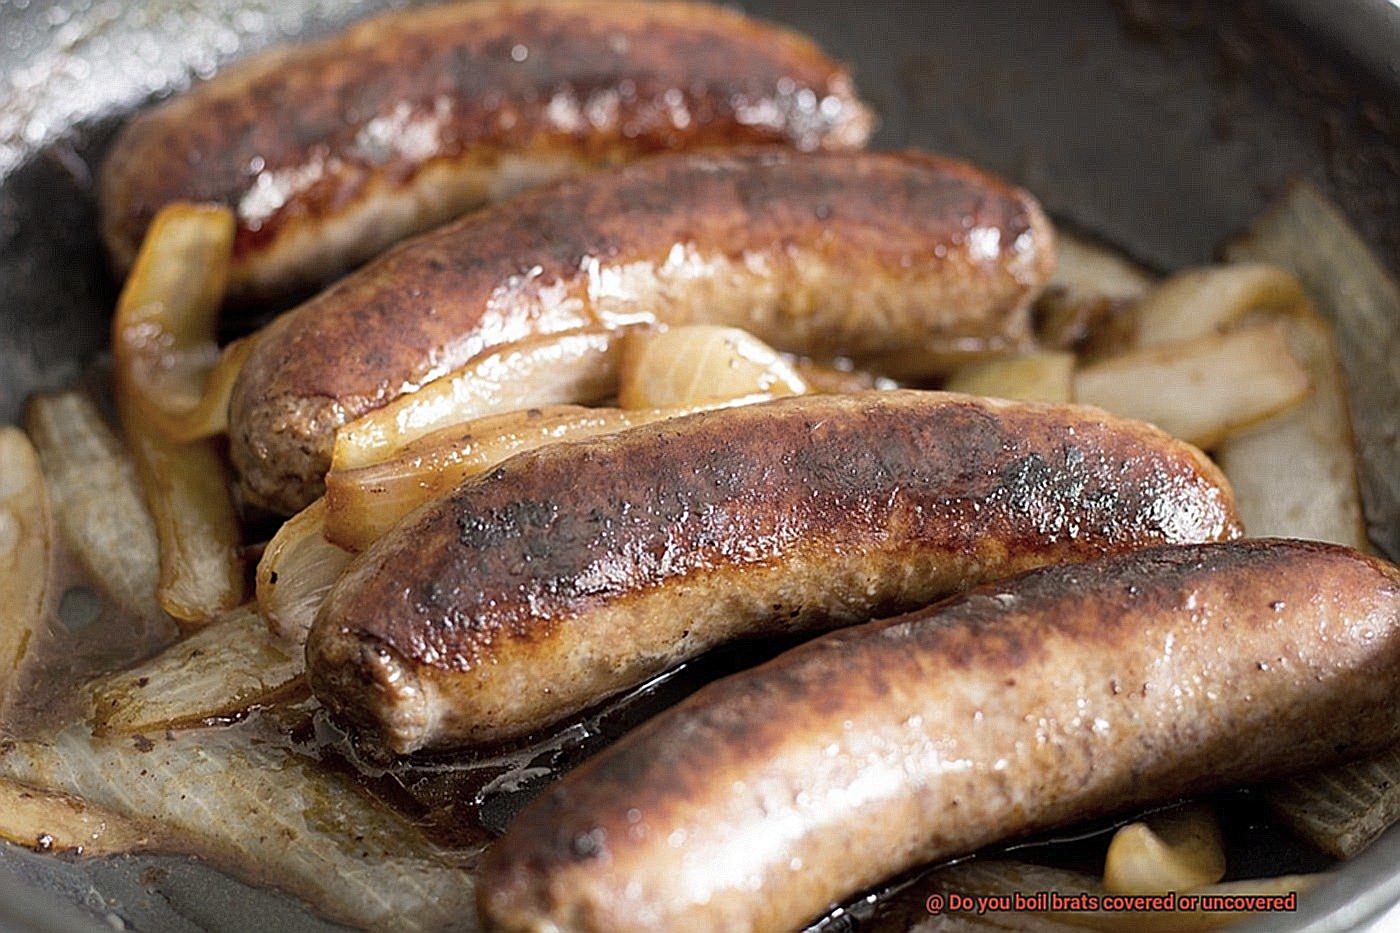 Do you boil brats covered or uncovered-2